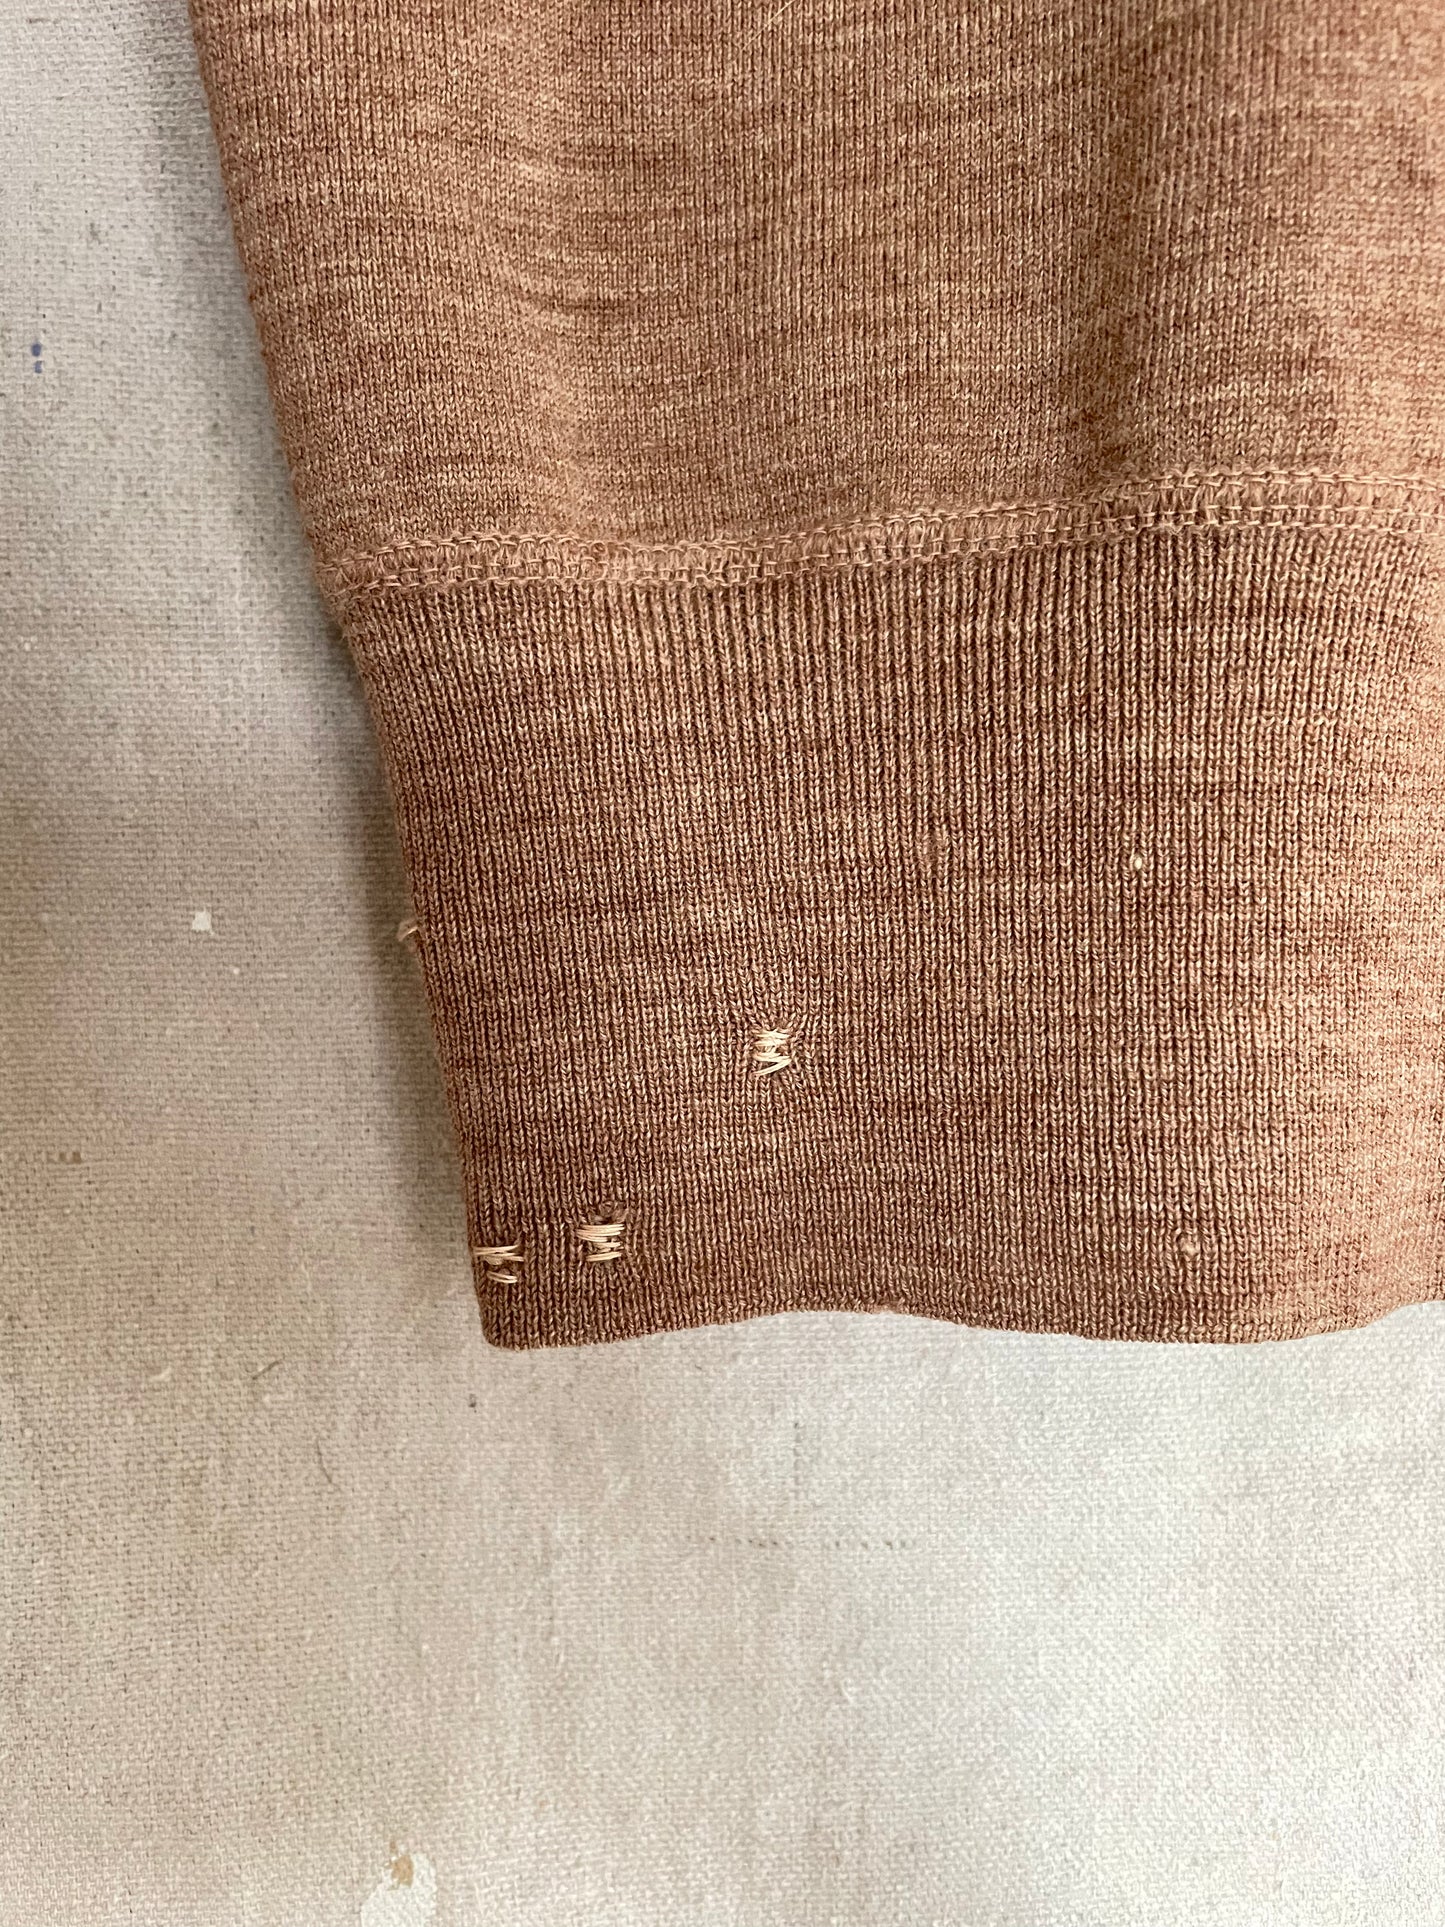 40s/50s Brown Thermal Henley